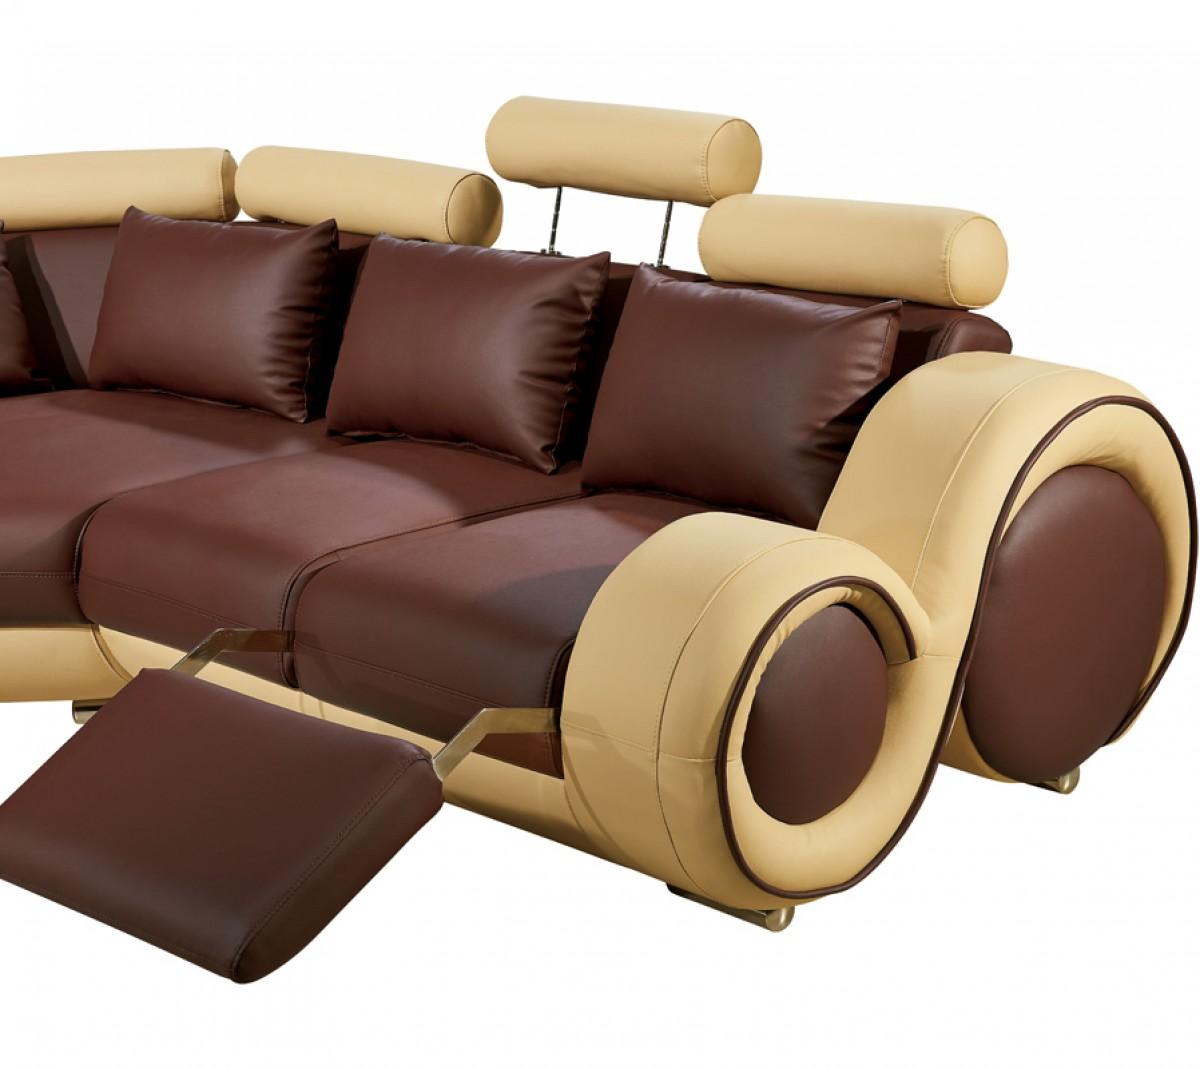 

    
Soflex Chicago Sectional Sofa Beige/Brown Soflex-Chicago-Sectional
